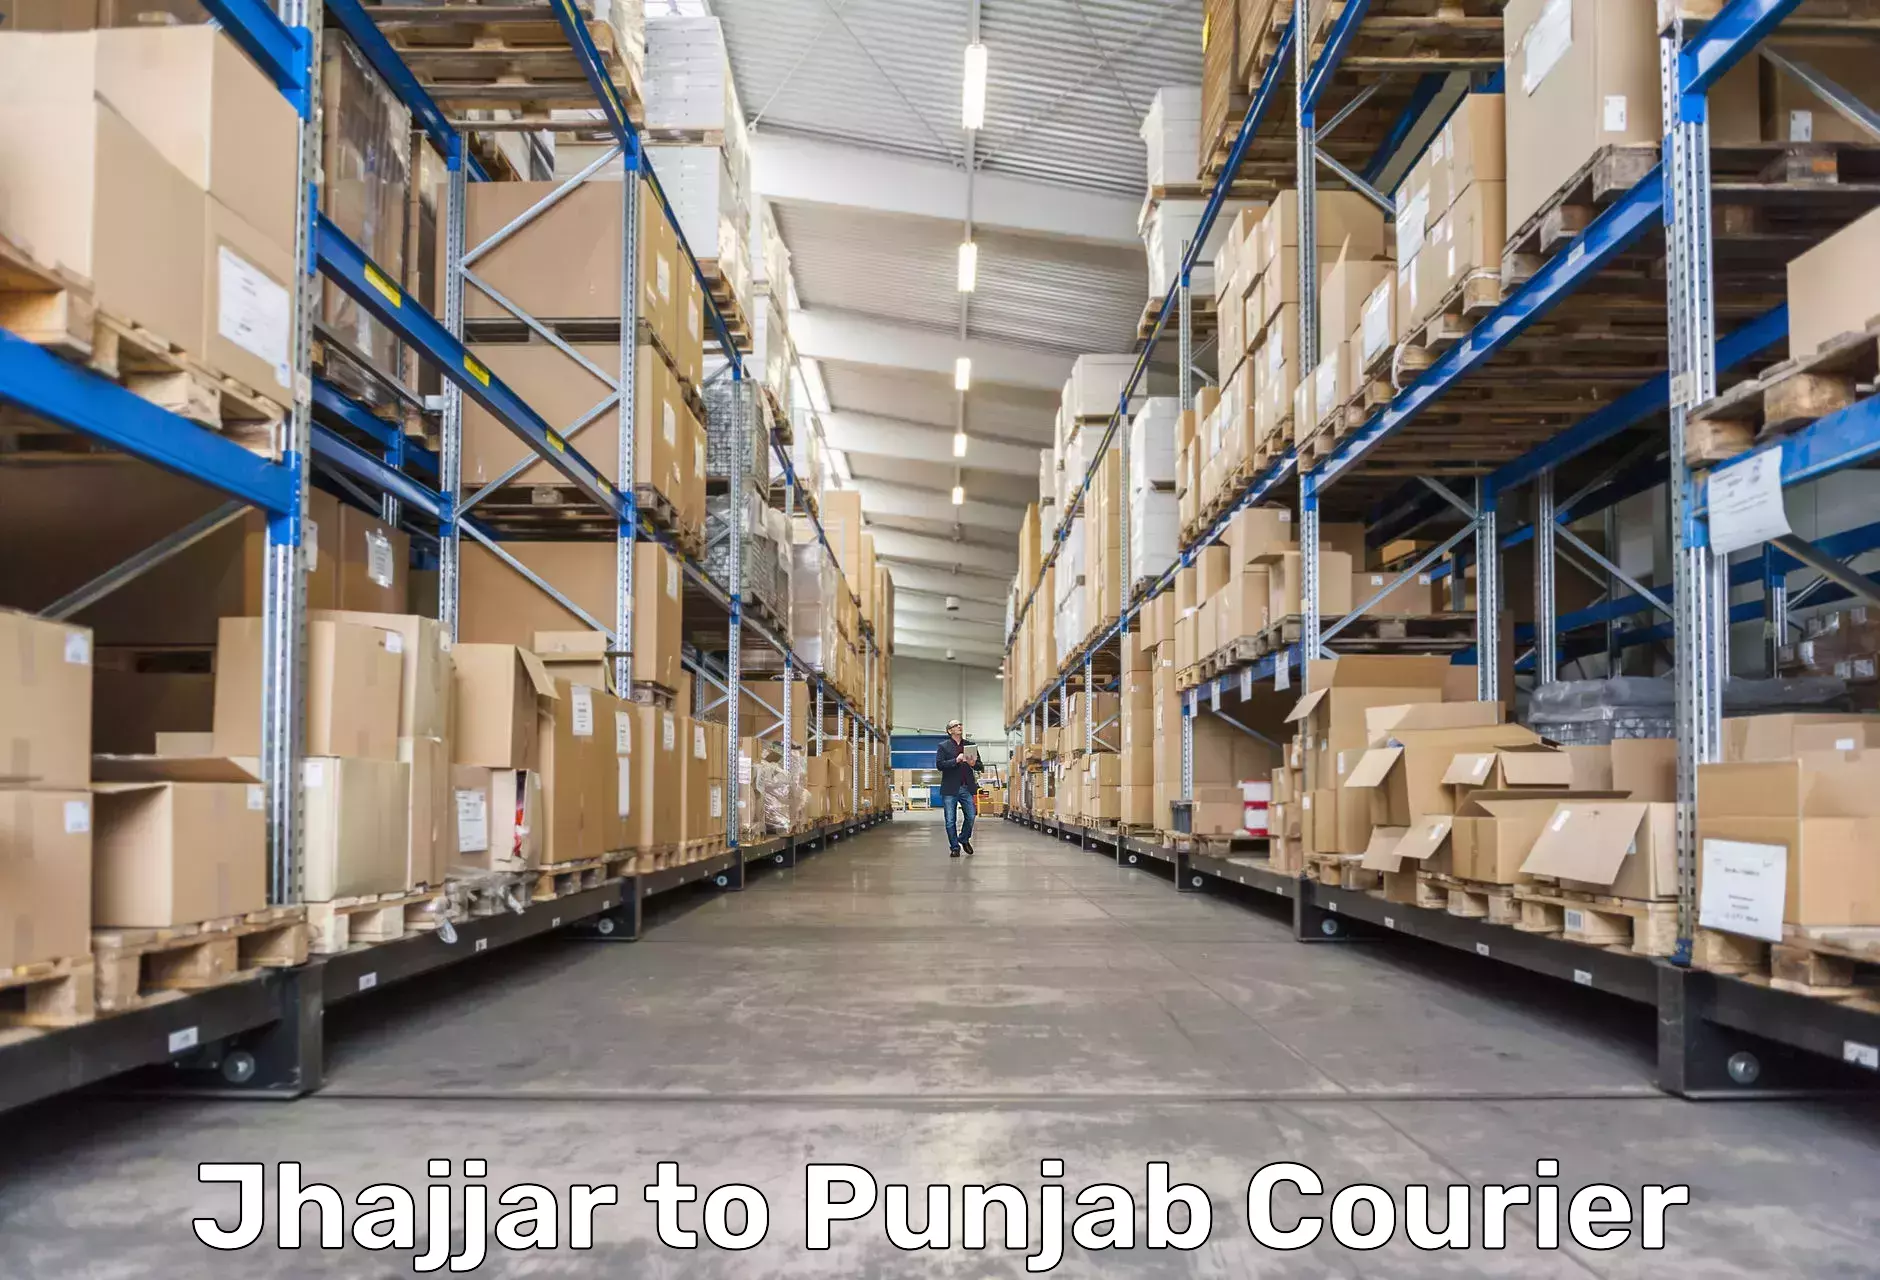 State-of-the-art courier technology Jhajjar to Ajnala